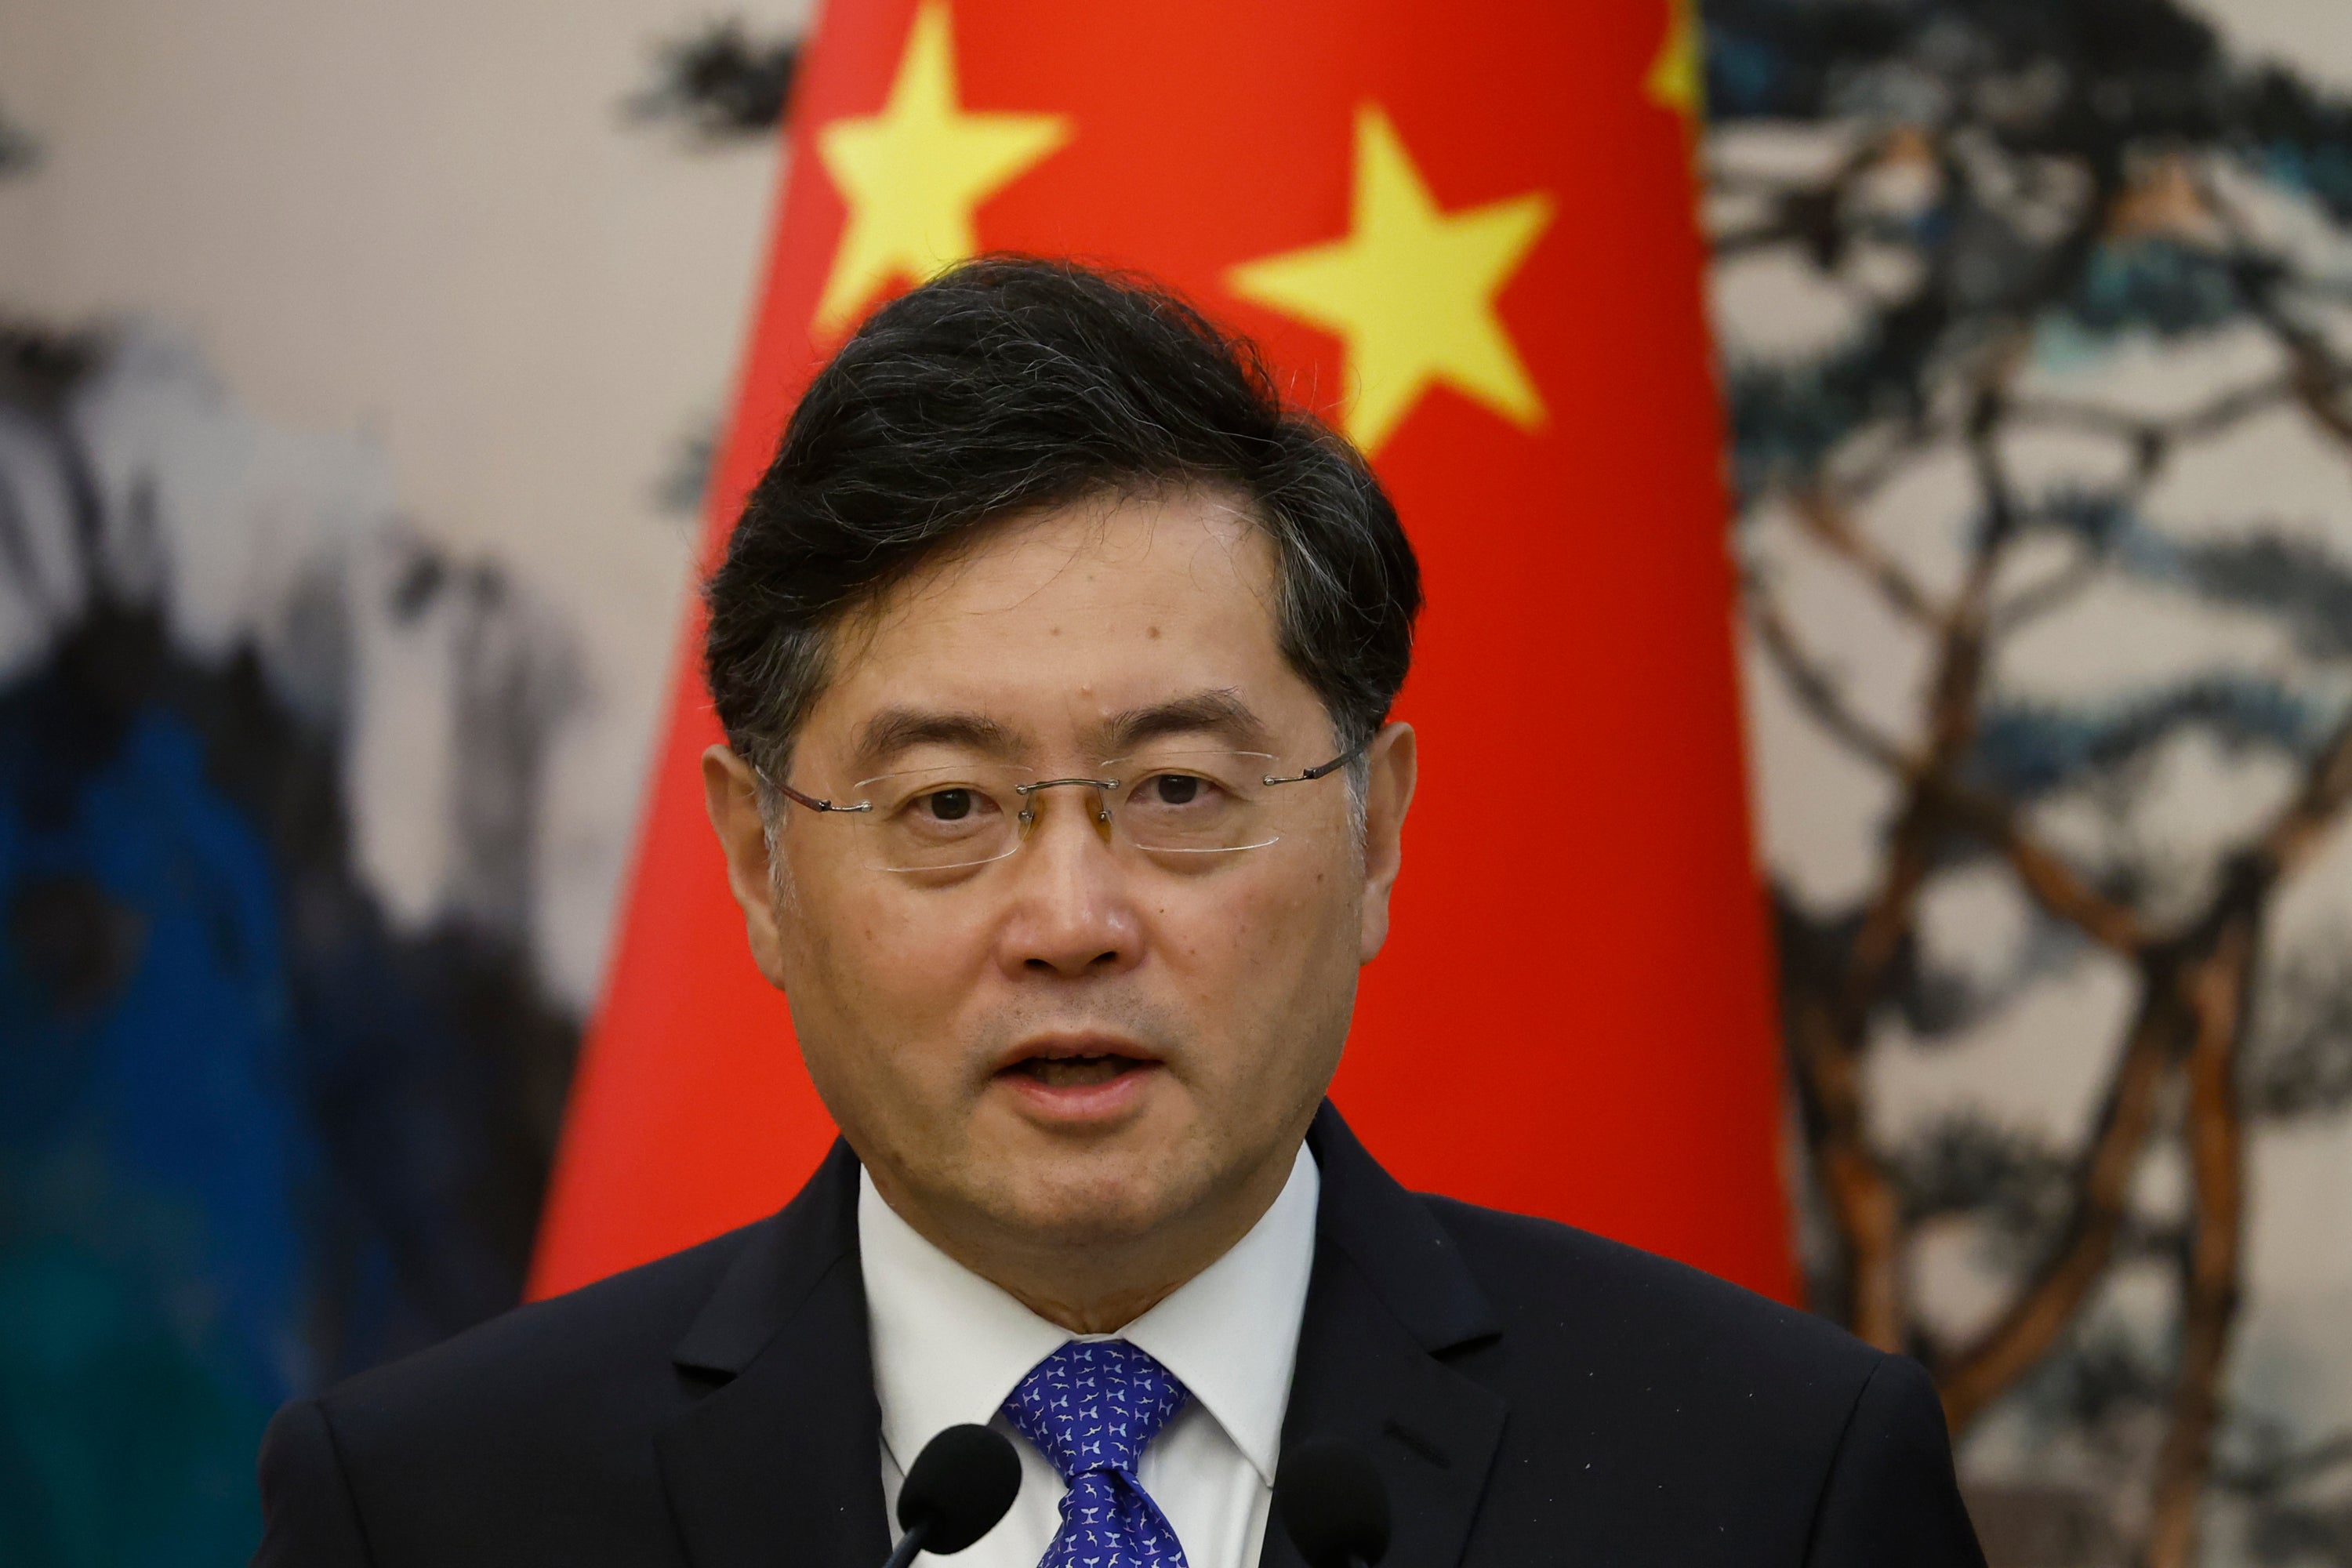 Chinese foreign minister Qin Gang gives a speech as he attends a news conference after talks with his Dutch counterpart Wopke Hoekstra in May this year in Beijing